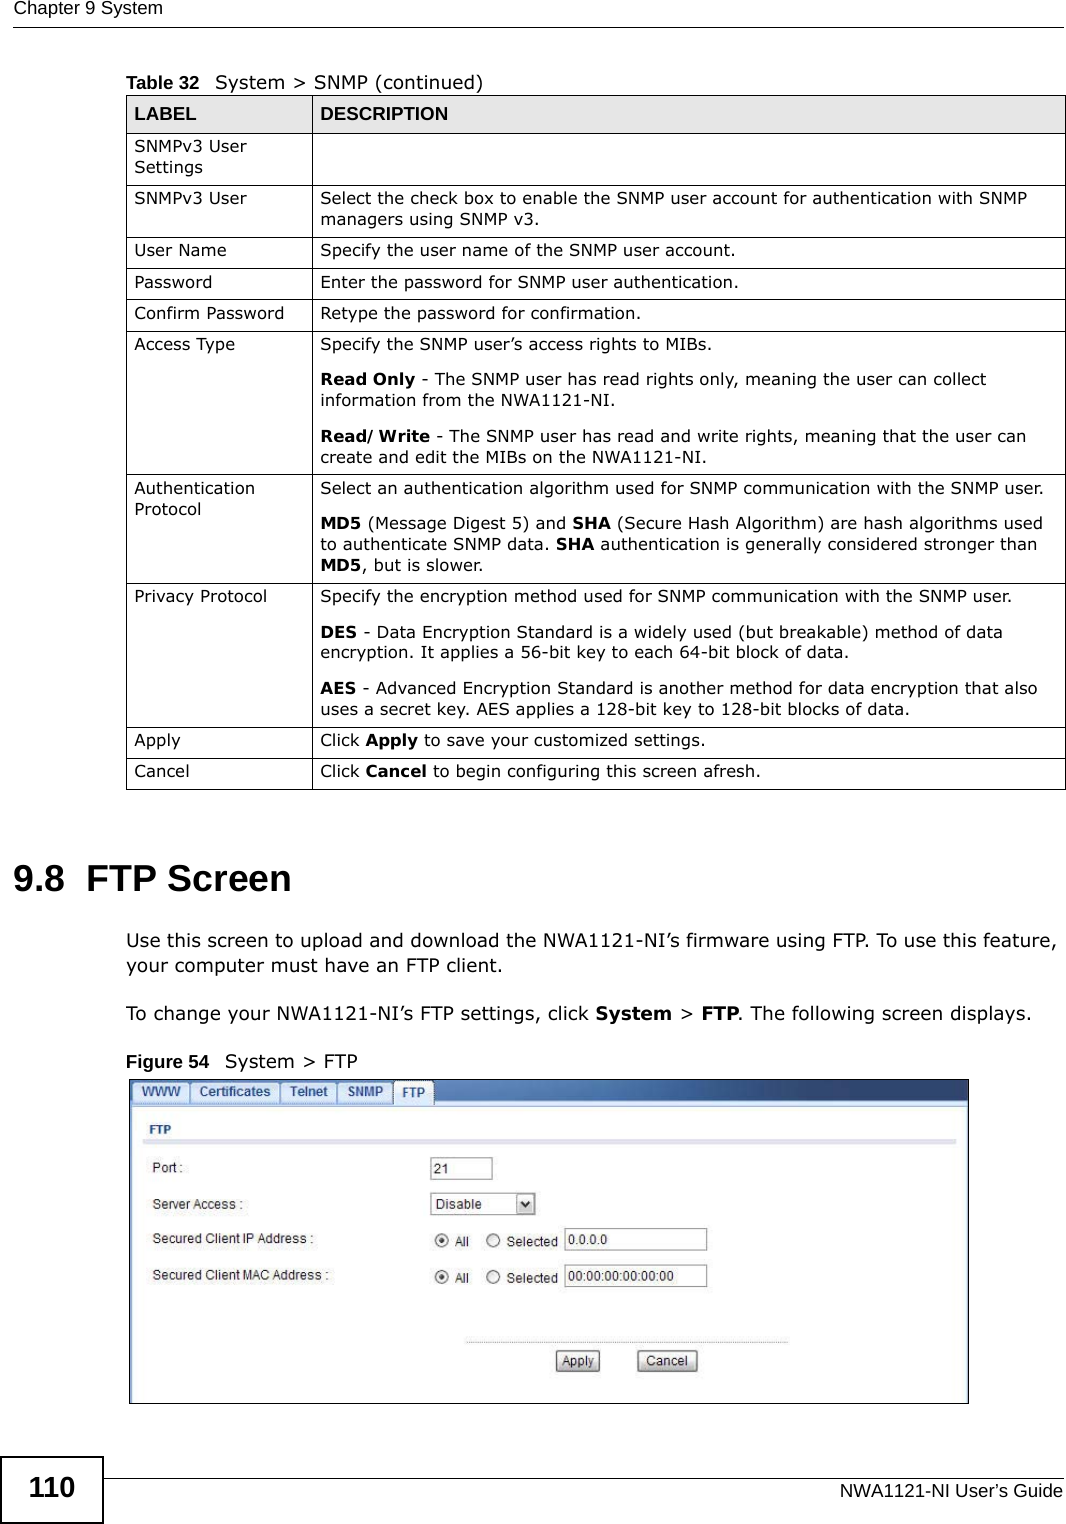 Chapter 9 SystemNWA1121-NI User’s Guide1109.8  FTP ScreenUse this screen to upload and download the NWA1121-NI’s firmware using FTP. To use this feature, your computer must have an FTP client.To change your NWA1121-NI’s FTP settings, click System &gt; FTP. The following screen displays.Figure 54   System &gt; FTPSNMPv3 User Settings SNMPv3 User Select the check box to enable the SNMP user account for authentication with SNMP managers using SNMP v3. User Name Specify the user name of the SNMP user account.Password Enter the password for SNMP user authentication. Confirm Password Retype the password for confirmation.Access Type Specify the SNMP user’s access rights to MIBs.Read Only - The SNMP user has read rights only, meaning the user can collect information from the NWA1121-NI.Read/Write - The SNMP user has read and write rights, meaning that the user can create and edit the MIBs on the NWA1121-NI.Authentication ProtocolSelect an authentication algorithm used for SNMP communication with the SNMP user.MD5 (Message Digest 5) and SHA (Secure Hash Algorithm) are hash algorithms used to authenticate SNMP data. SHA authentication is generally considered stronger than MD5, but is slower. Privacy Protocol Specify the encryption method used for SNMP communication with the SNMP user. DES - Data Encryption Standard is a widely used (but breakable) method of data encryption. It applies a 56-bit key to each 64-bit block of data.AES - Advanced Encryption Standard is another method for data encryption that also uses a secret key. AES applies a 128-bit key to 128-bit blocks of data.Apply Click Apply to save your customized settings. Cancel Click Cancel to begin configuring this screen afresh.Table 32   System &gt; SNMP (continued)LABEL DESCRIPTION